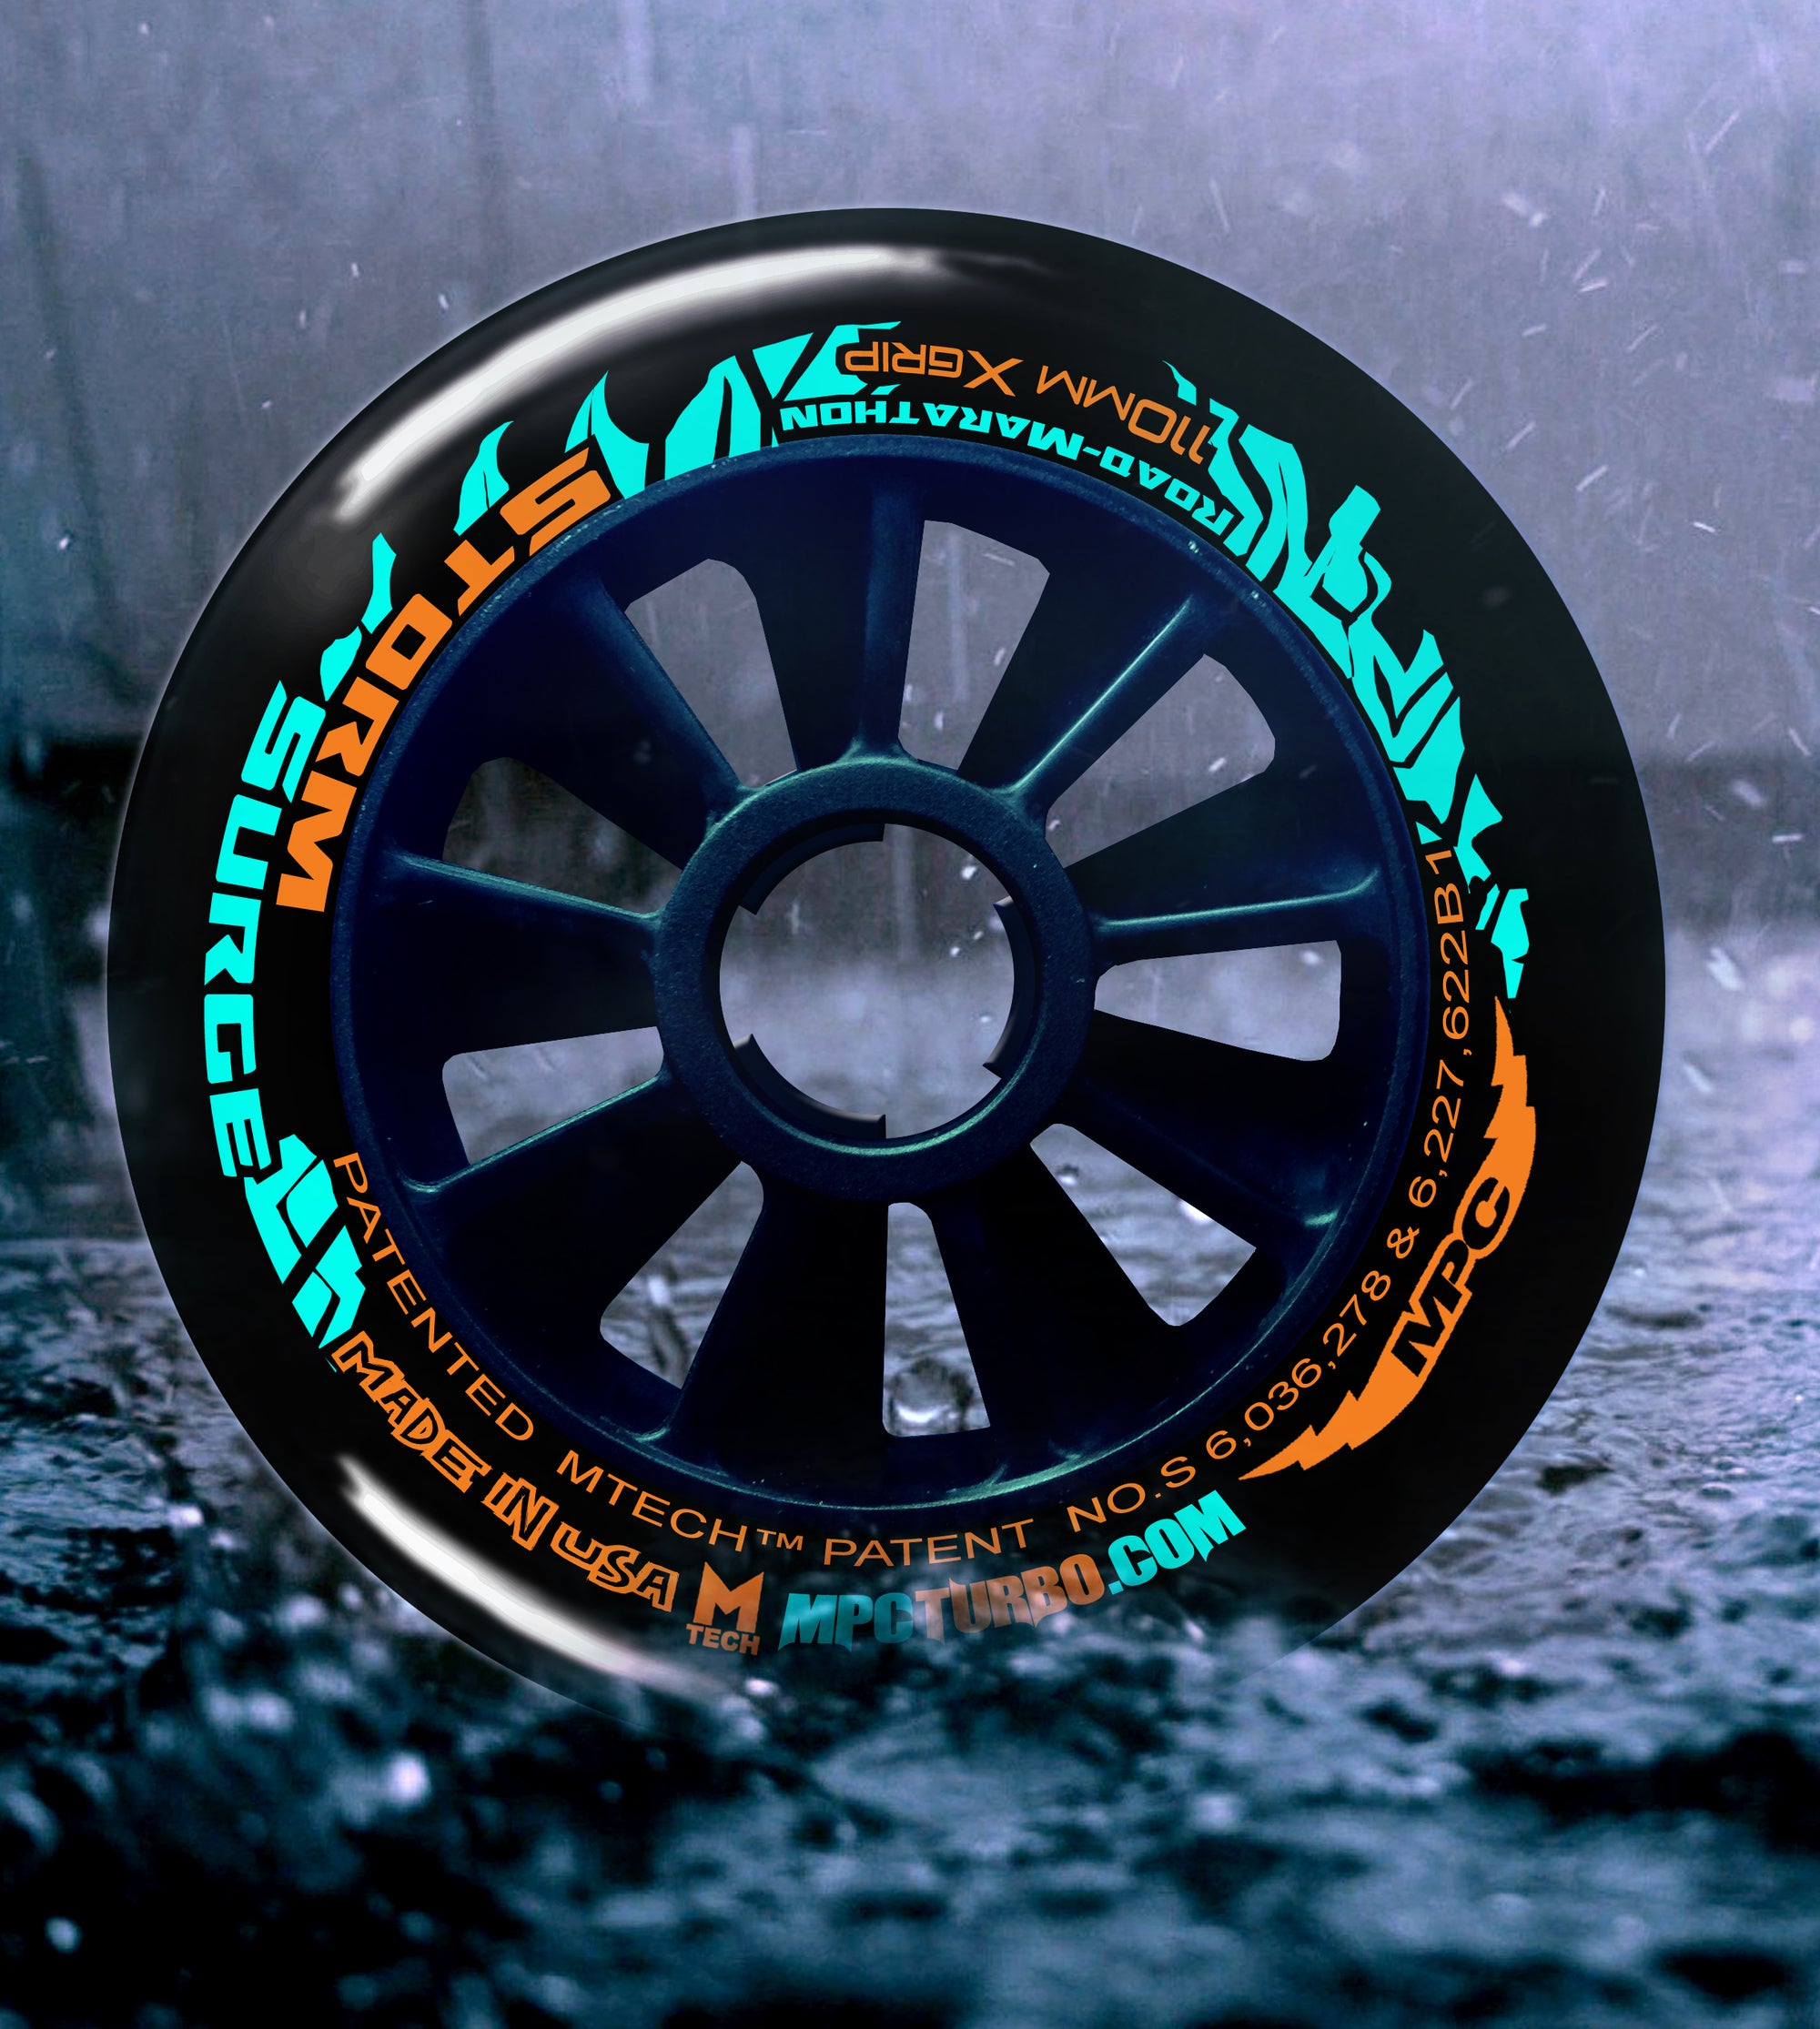 MPC Storm Surge the only inline skating wheels designed to #GoSkate in the rain